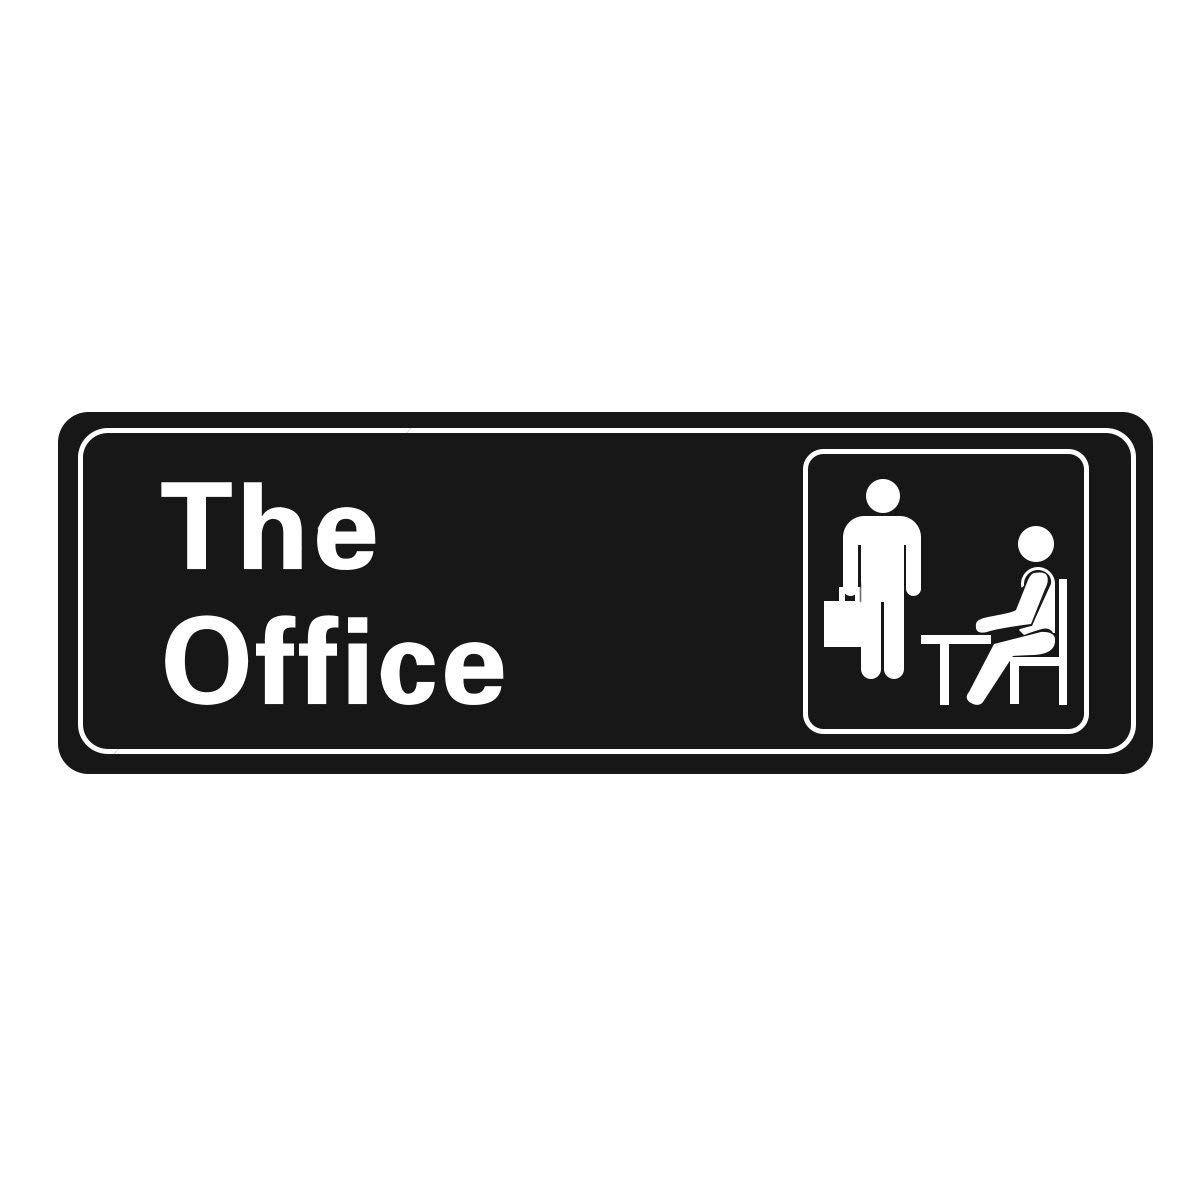 White the Office Logo - Amazon.com: The Office Self Adhesive Sign, 9 X 3 Inch (Black / White ...